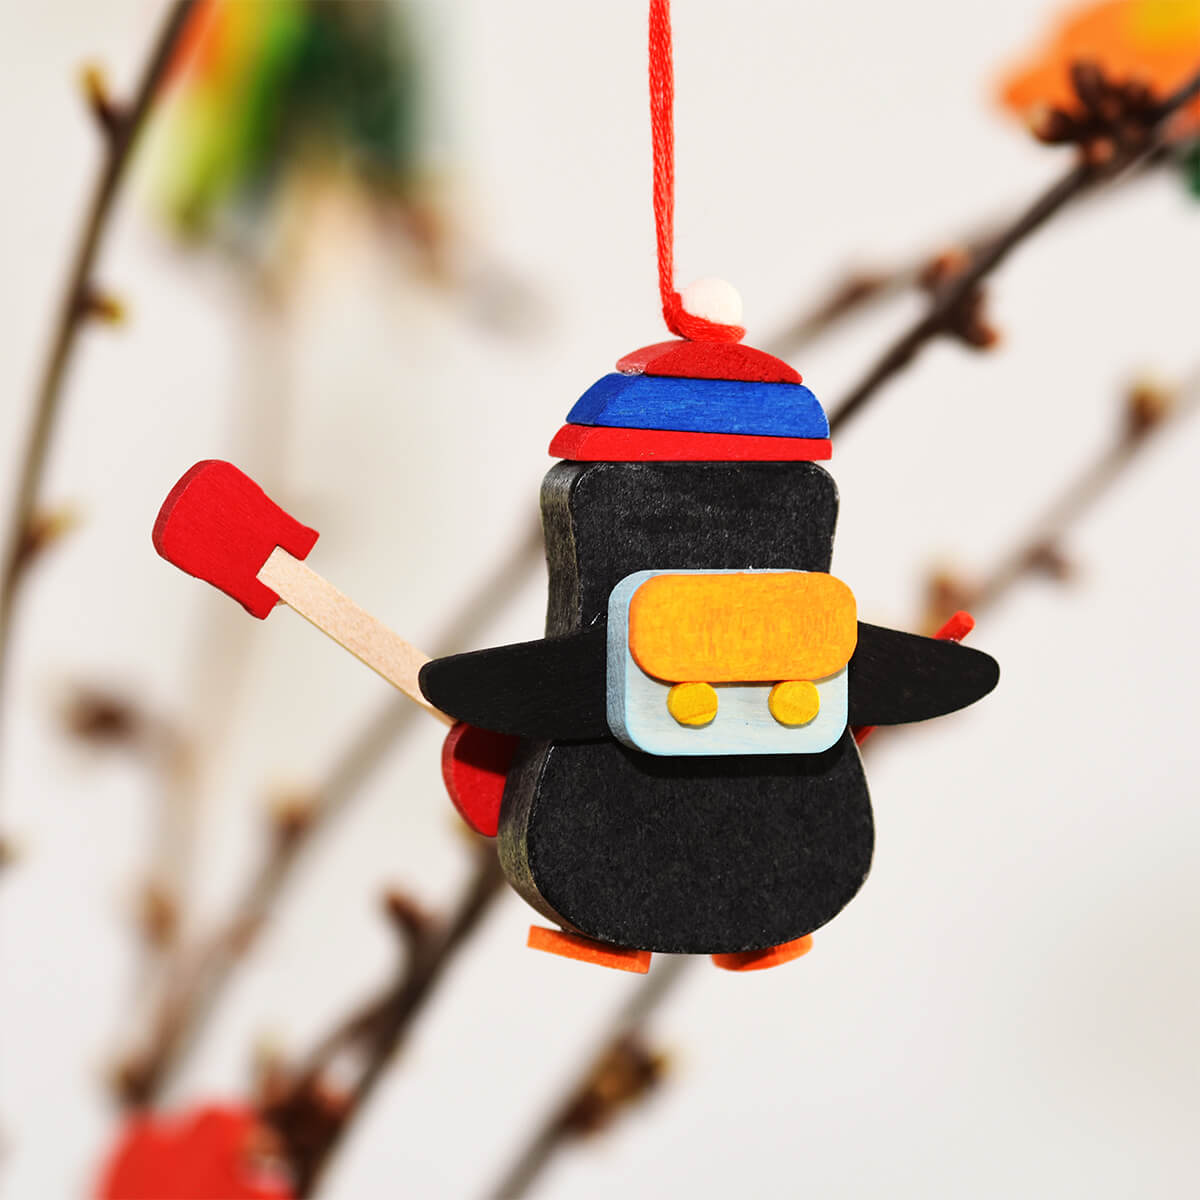 Penguin Ornament with tree